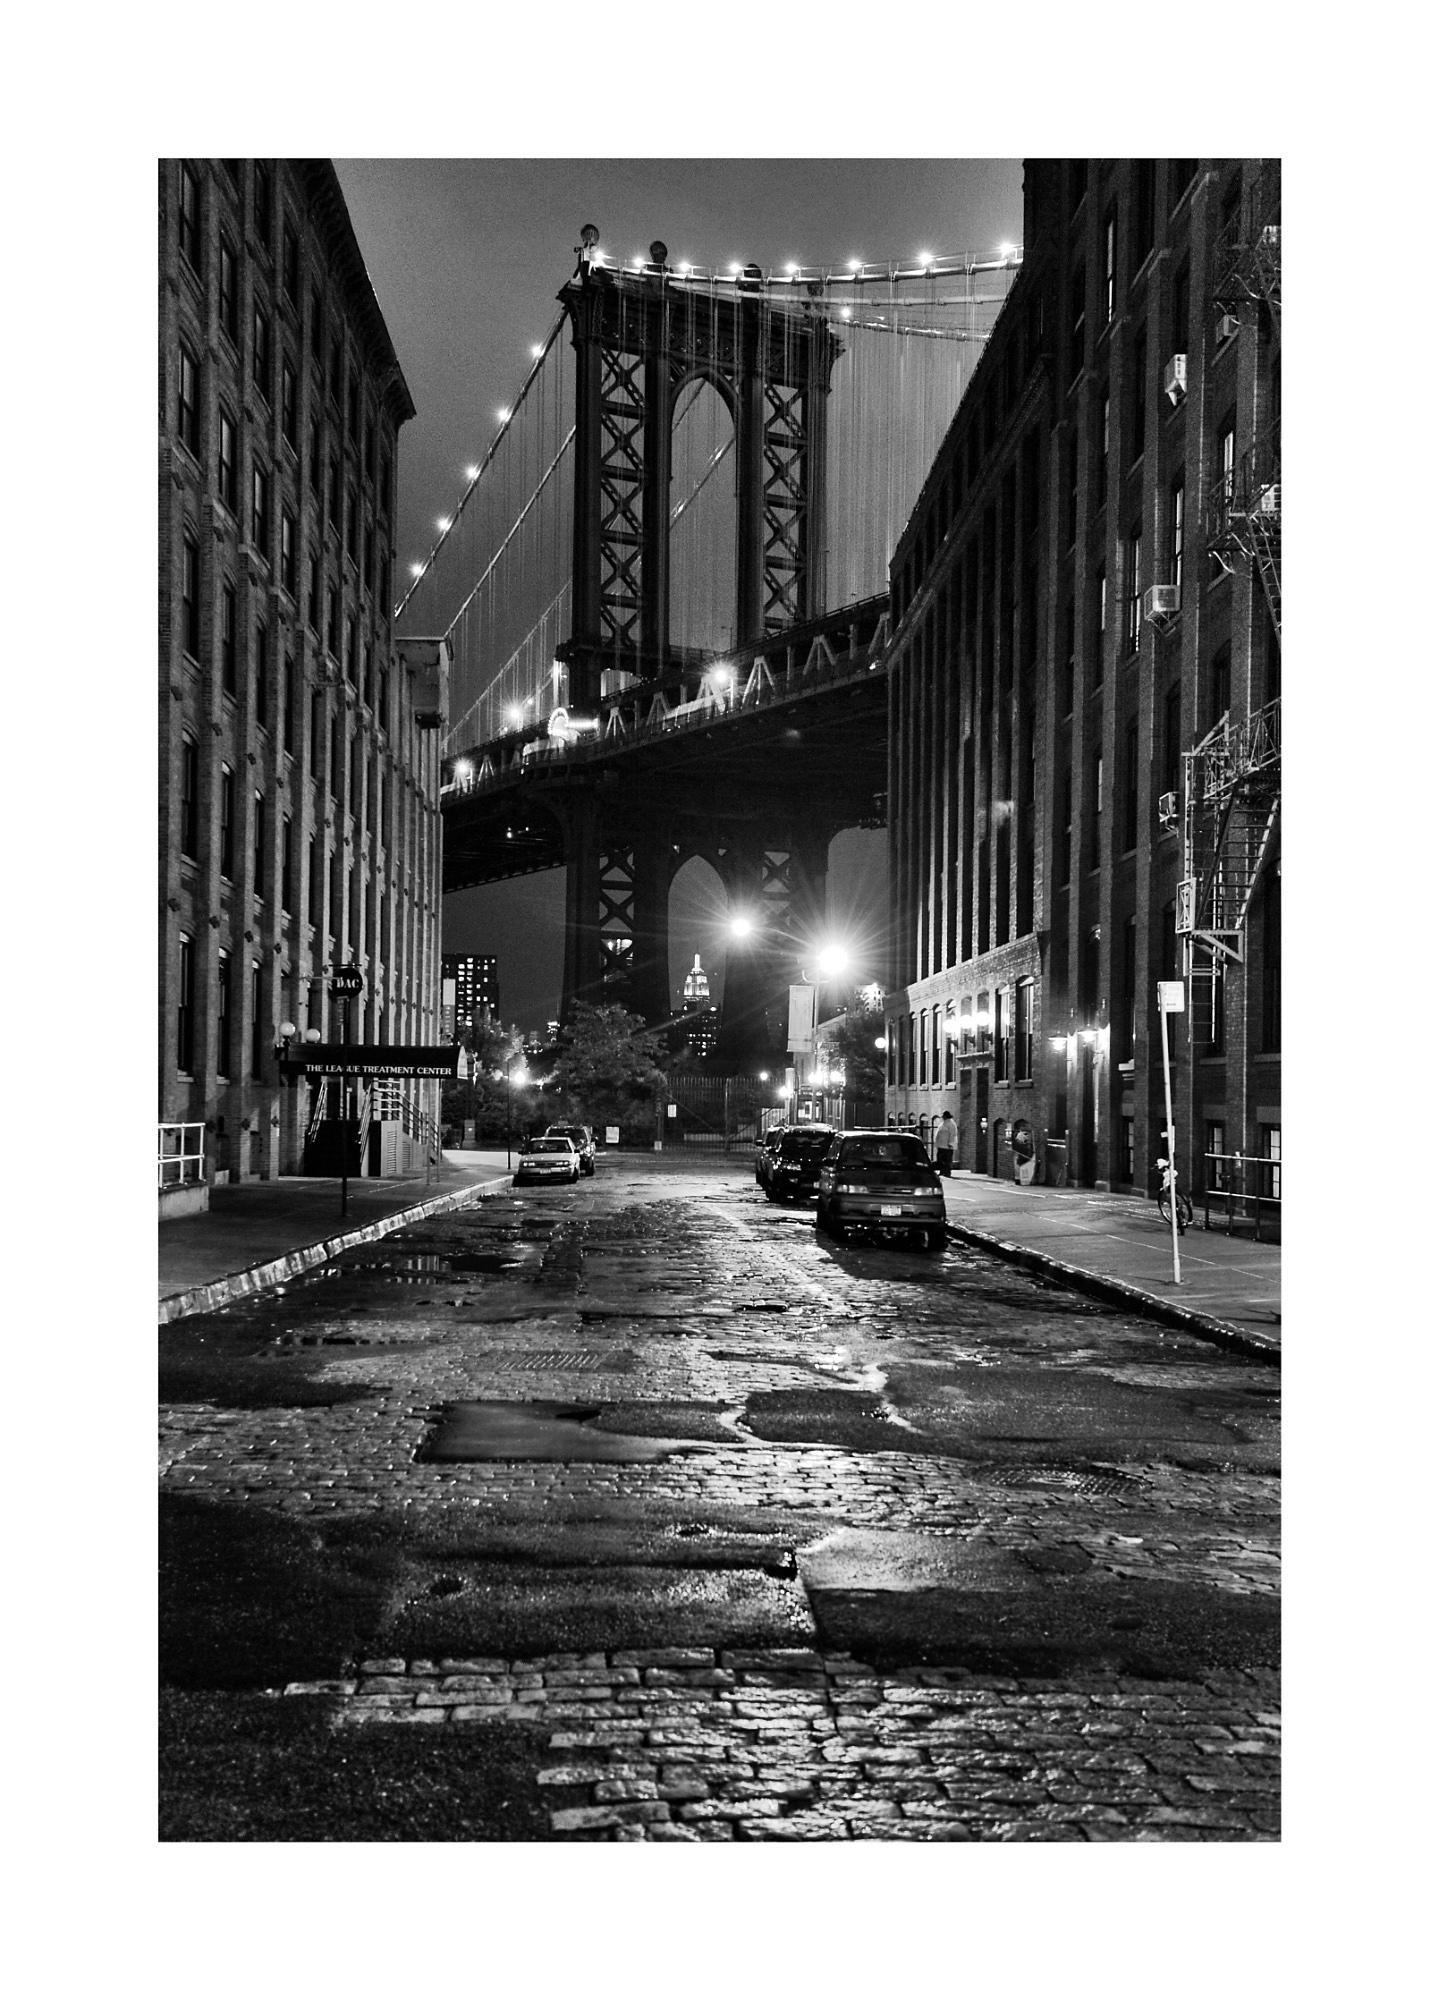 Washington Bridge New York, black and white fine art print, 40 x 60 cm by Rainer Martini
Rainer Martini is a well-known photographer from Germany, born 1948
He started in sports photography, shooting all Olympic Games from 1772-2006 for the